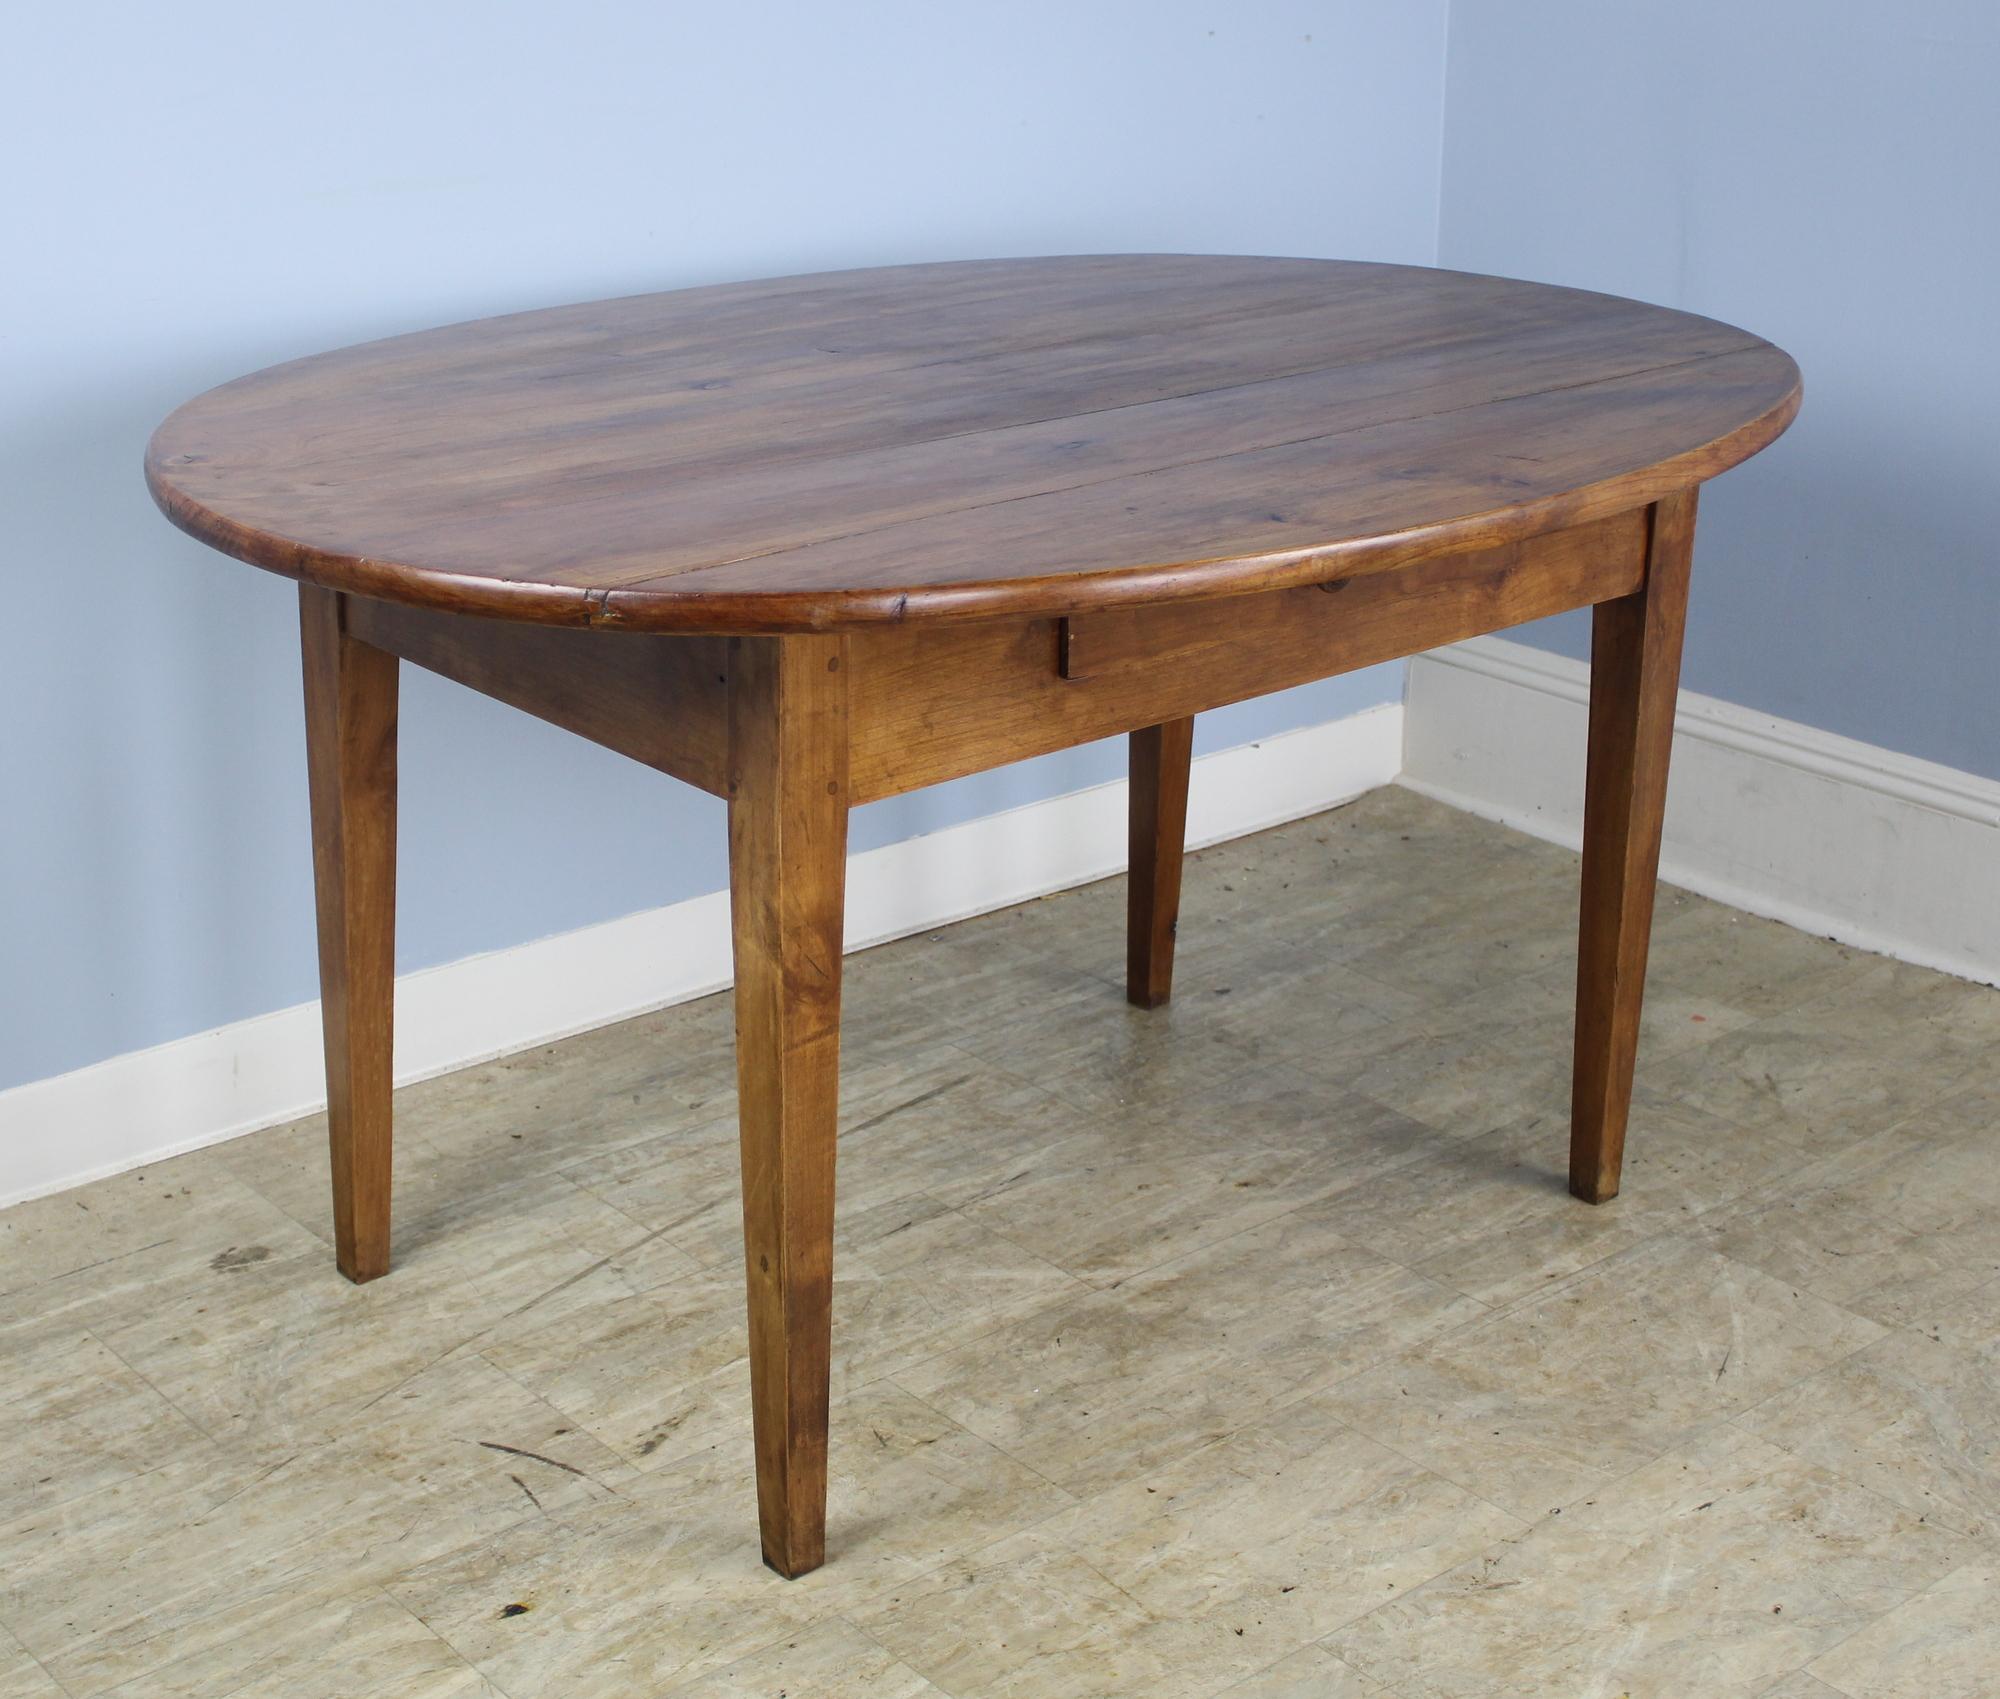 A simple and elegant oval dining table in mellow fruitwood with warm patina. The thick top is pretty and in good condition, nicely pegged at the legs. Apron height is 23 inches; the base is inset for seating comfort. There are a few interesting